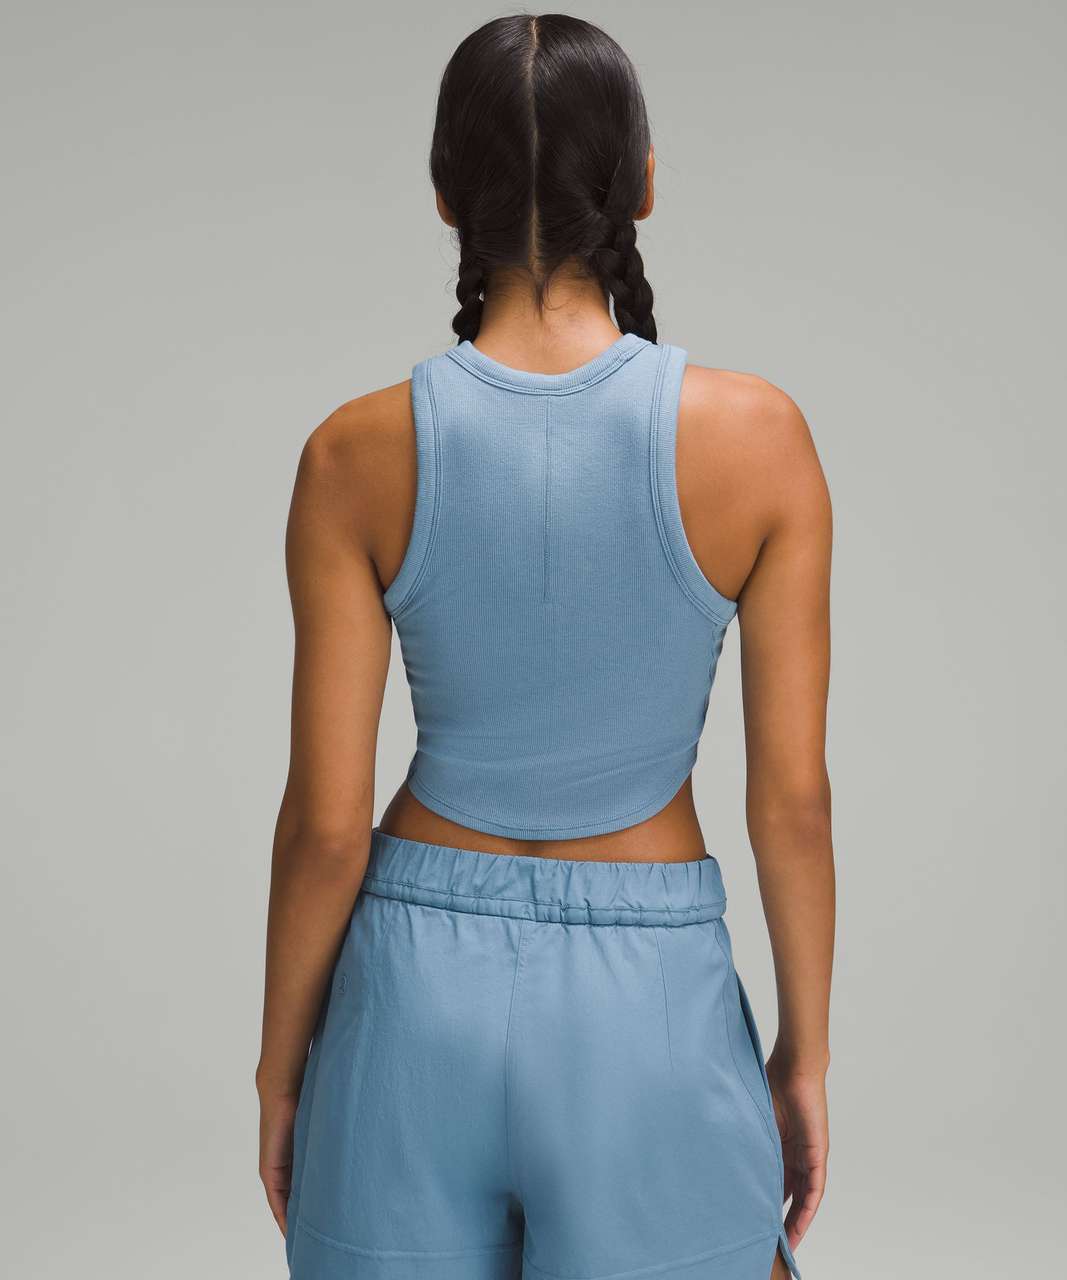 Lululemon Hold Tight Cropped Tank Top - Utility Blue